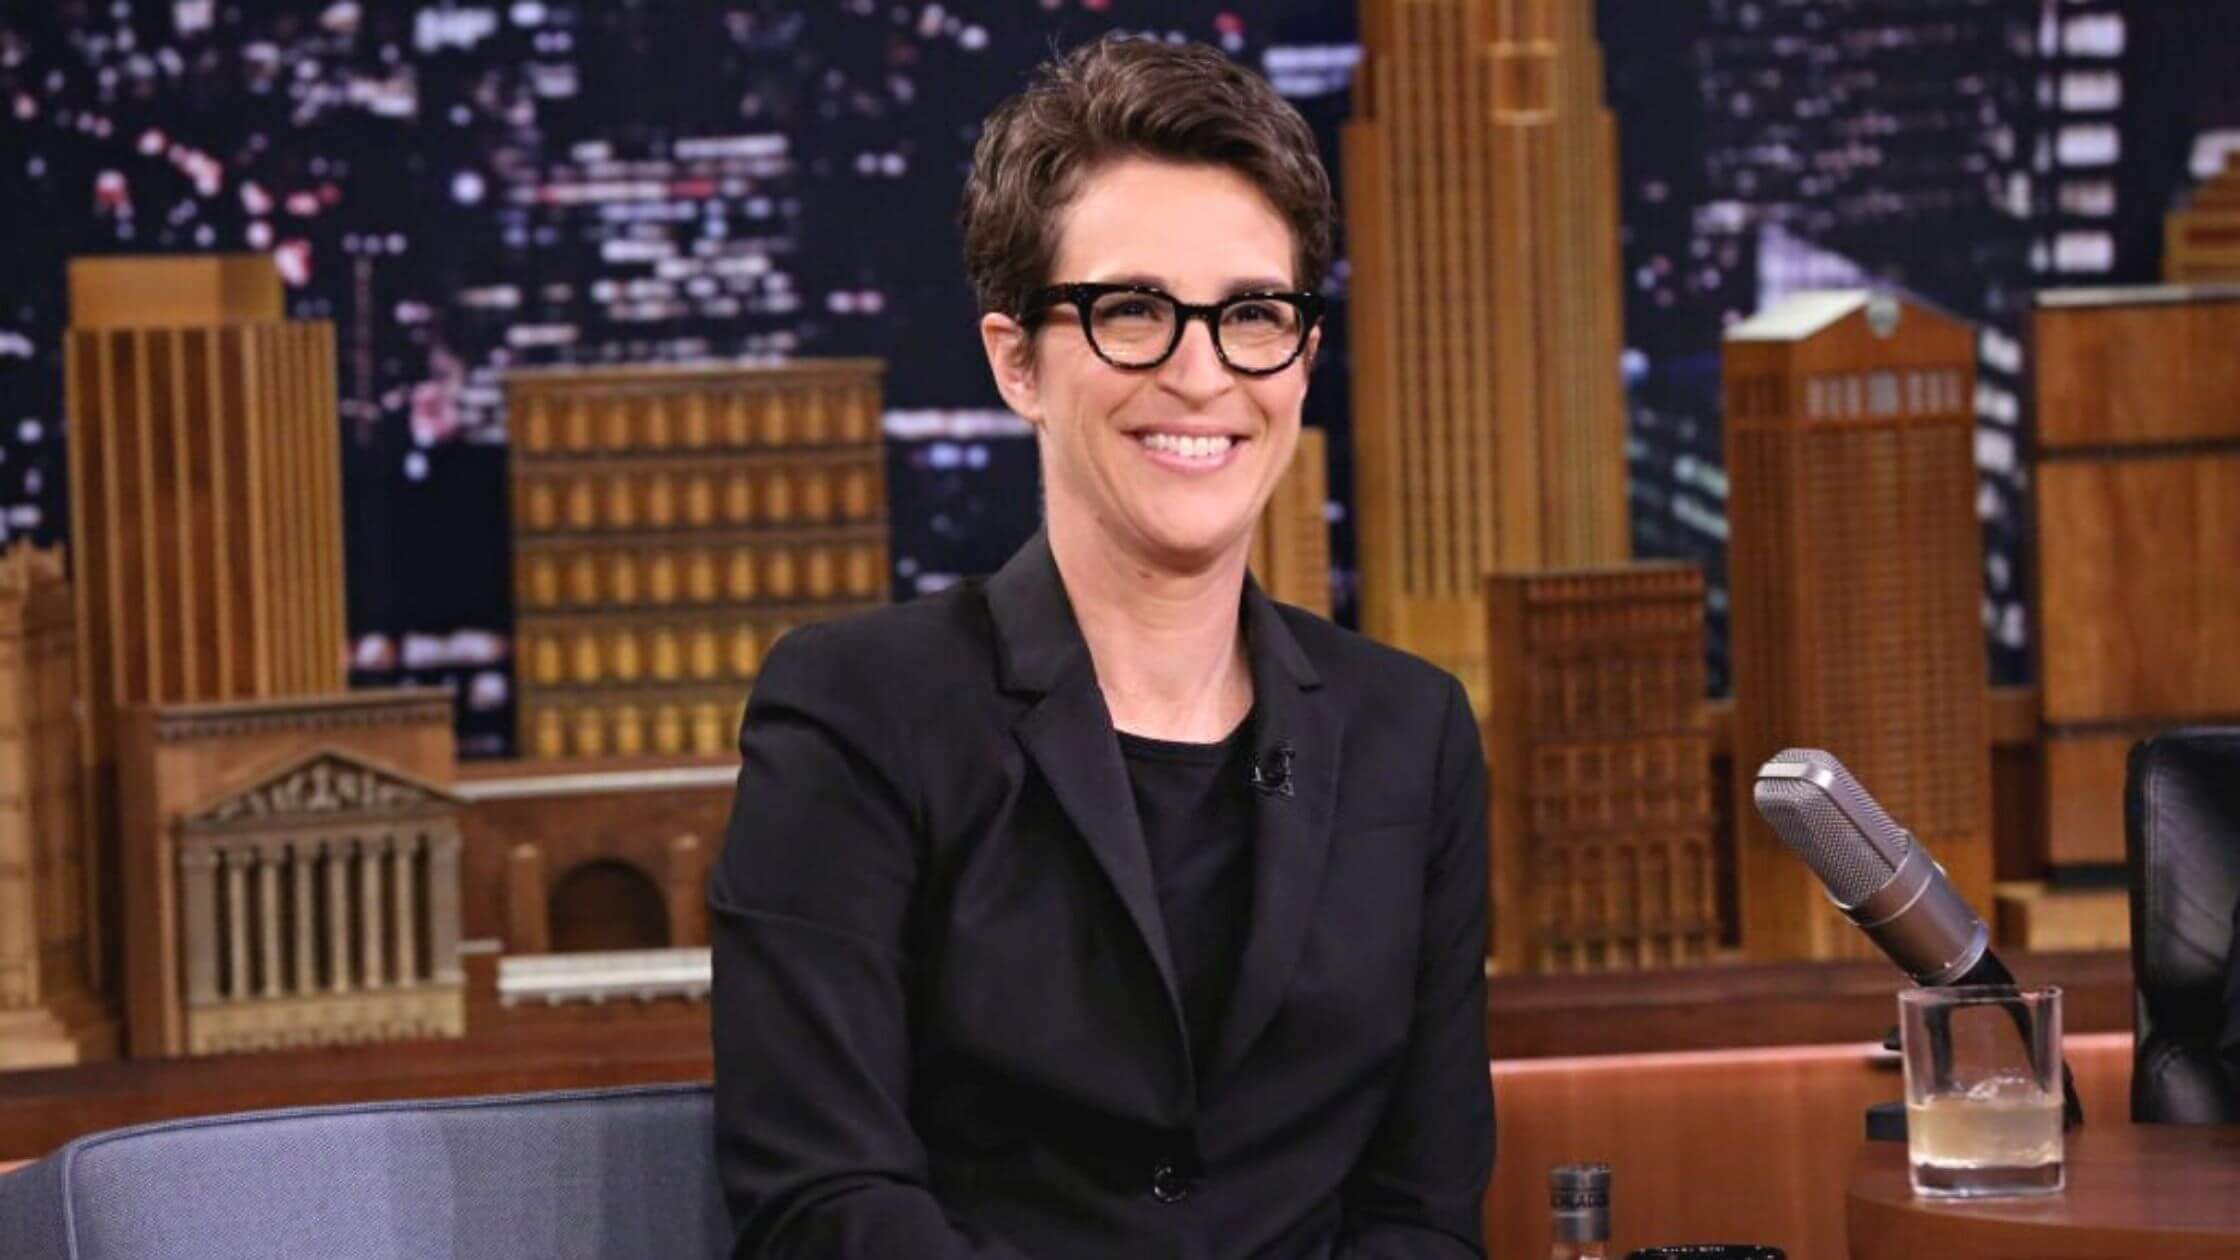 Why Not? Rachel Maddow Hasn't Appeared On Her Show Yet